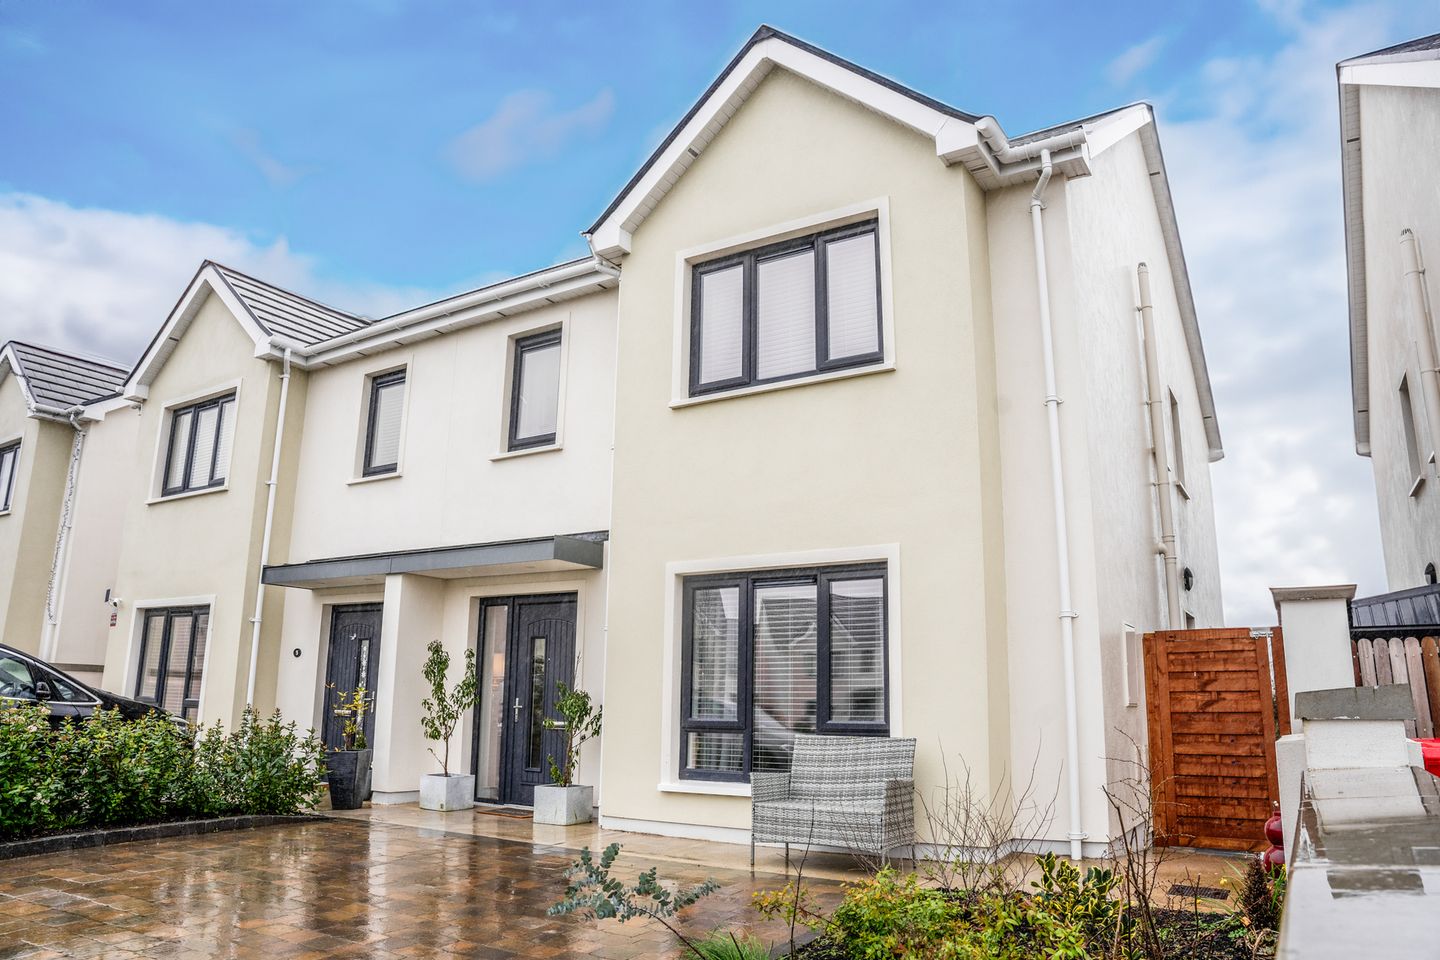 6 The Avenue, Elmbury, Carrigtwohill, Co. Cork, T45PD65